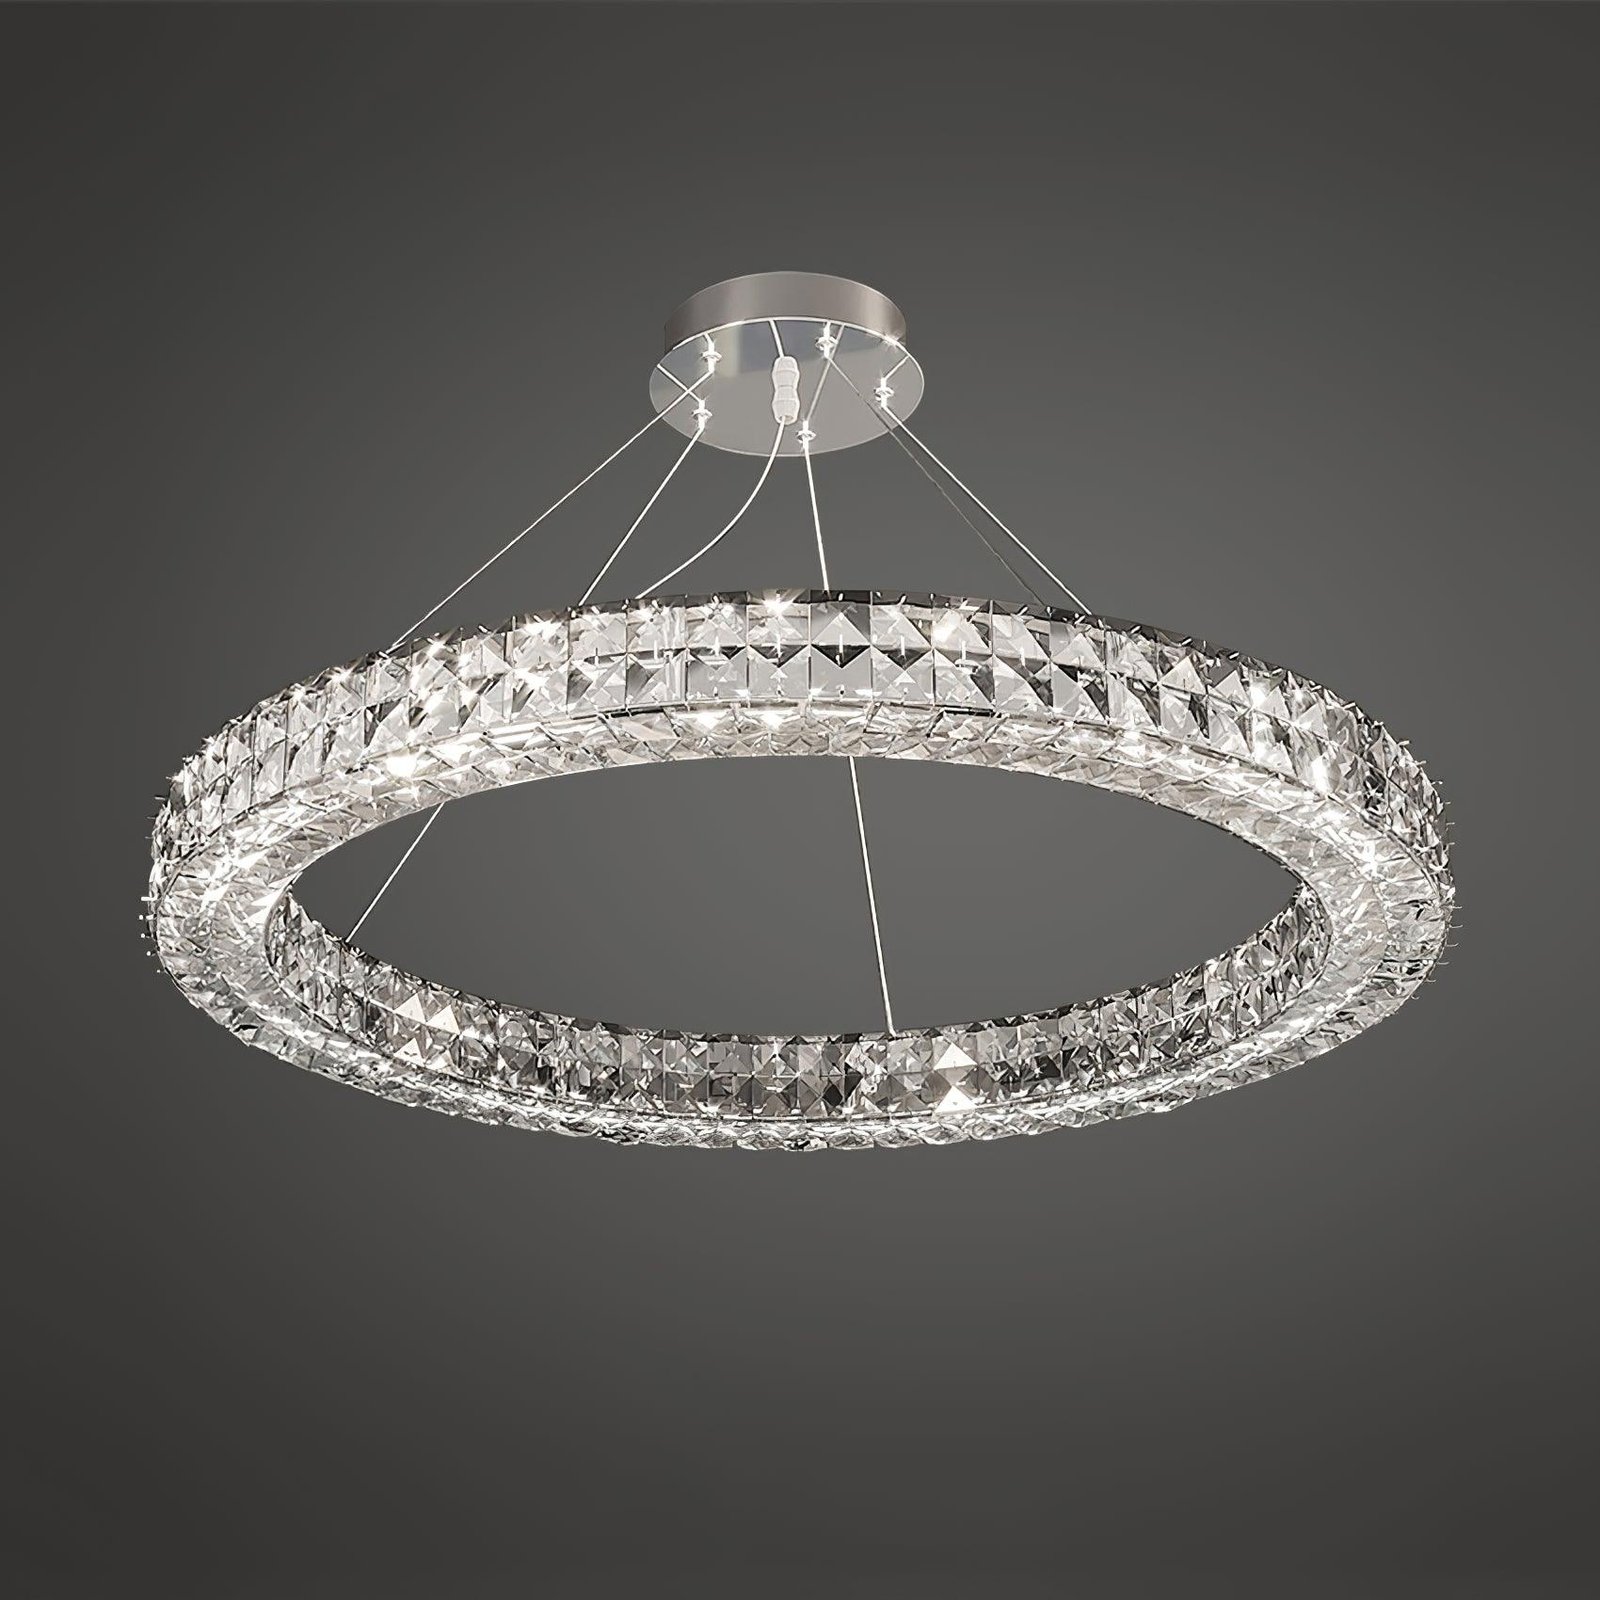 Silver Spiridon Chandelier with a Diameter of 31.5 inches and a Height of 59 inches, or a Diameter of 80cm and a Height of 150cm, Emitting a Cool White Light.